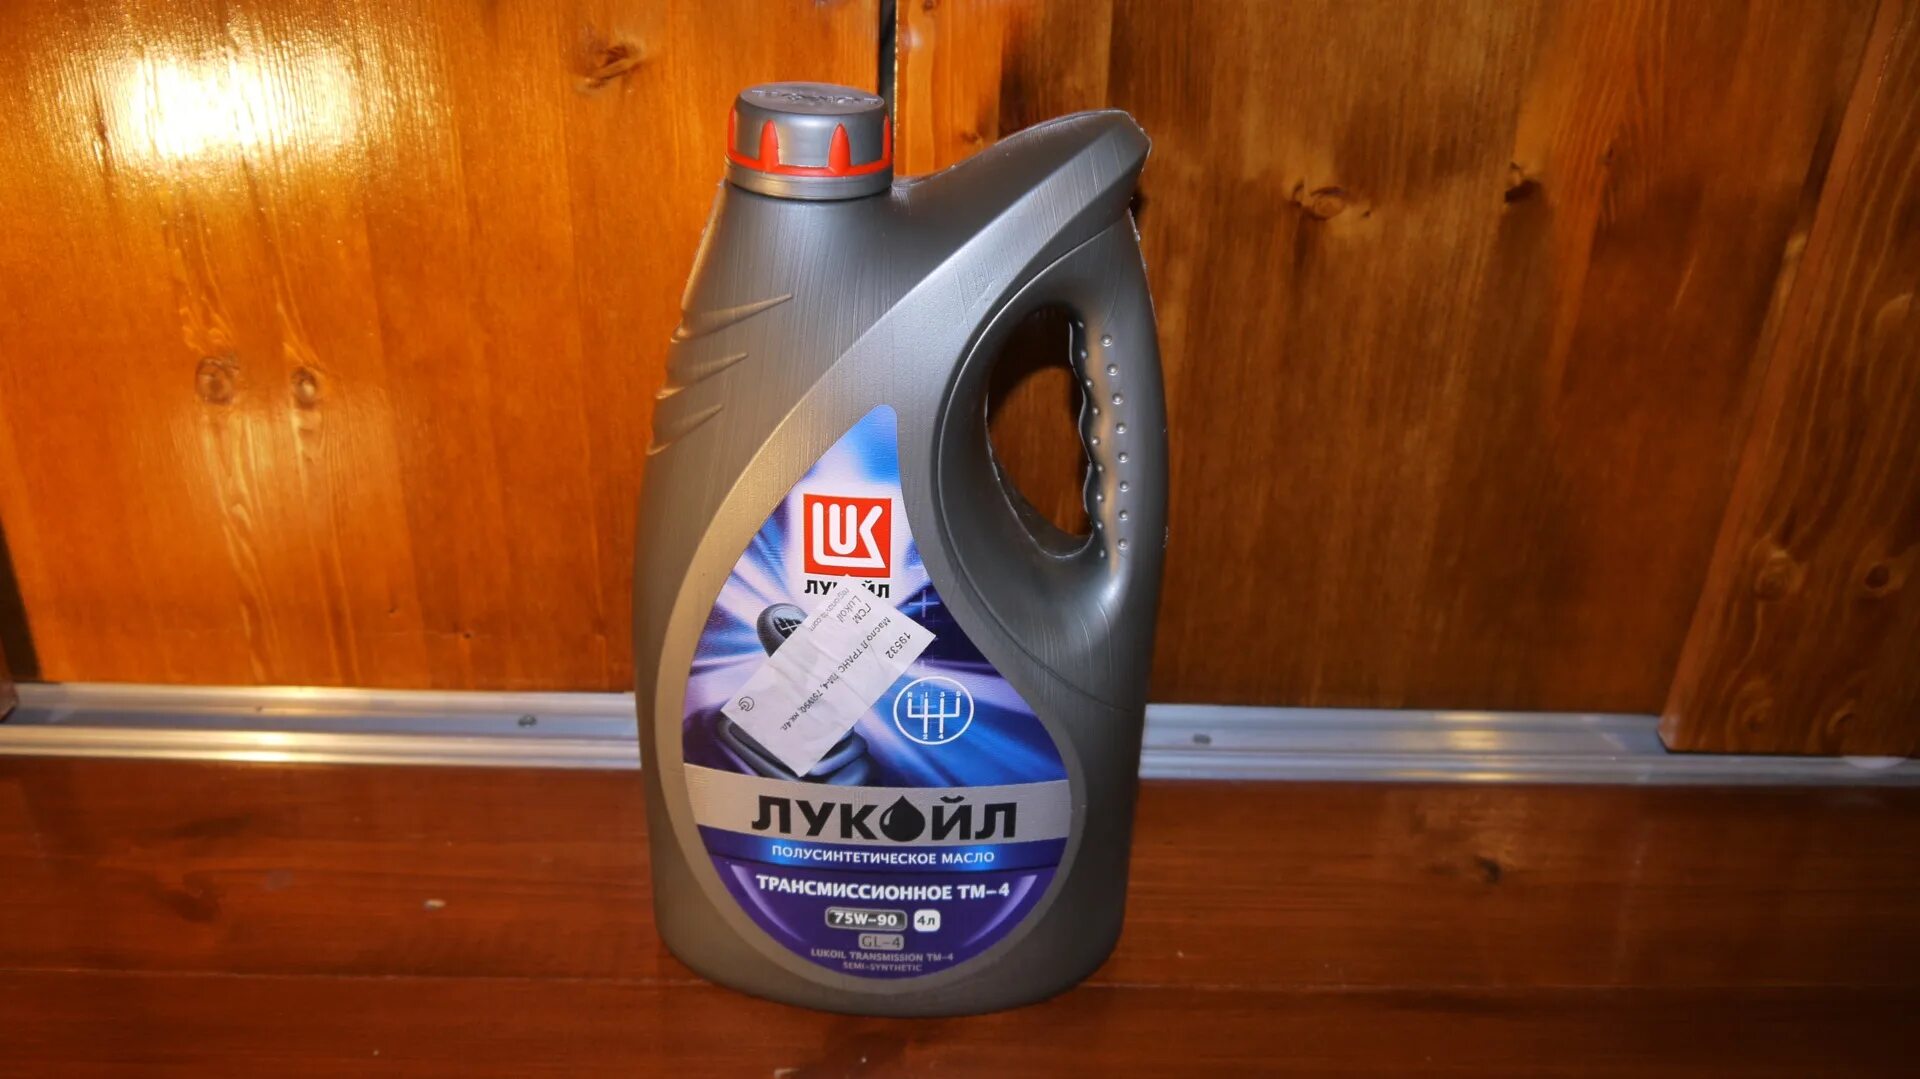 Масло Лукойл 75w90. Лукойл ТМ-4 75w-90 фф3. Лукойл ТМ 4. Lukoil 75w90 20л. Масло лукойл 75